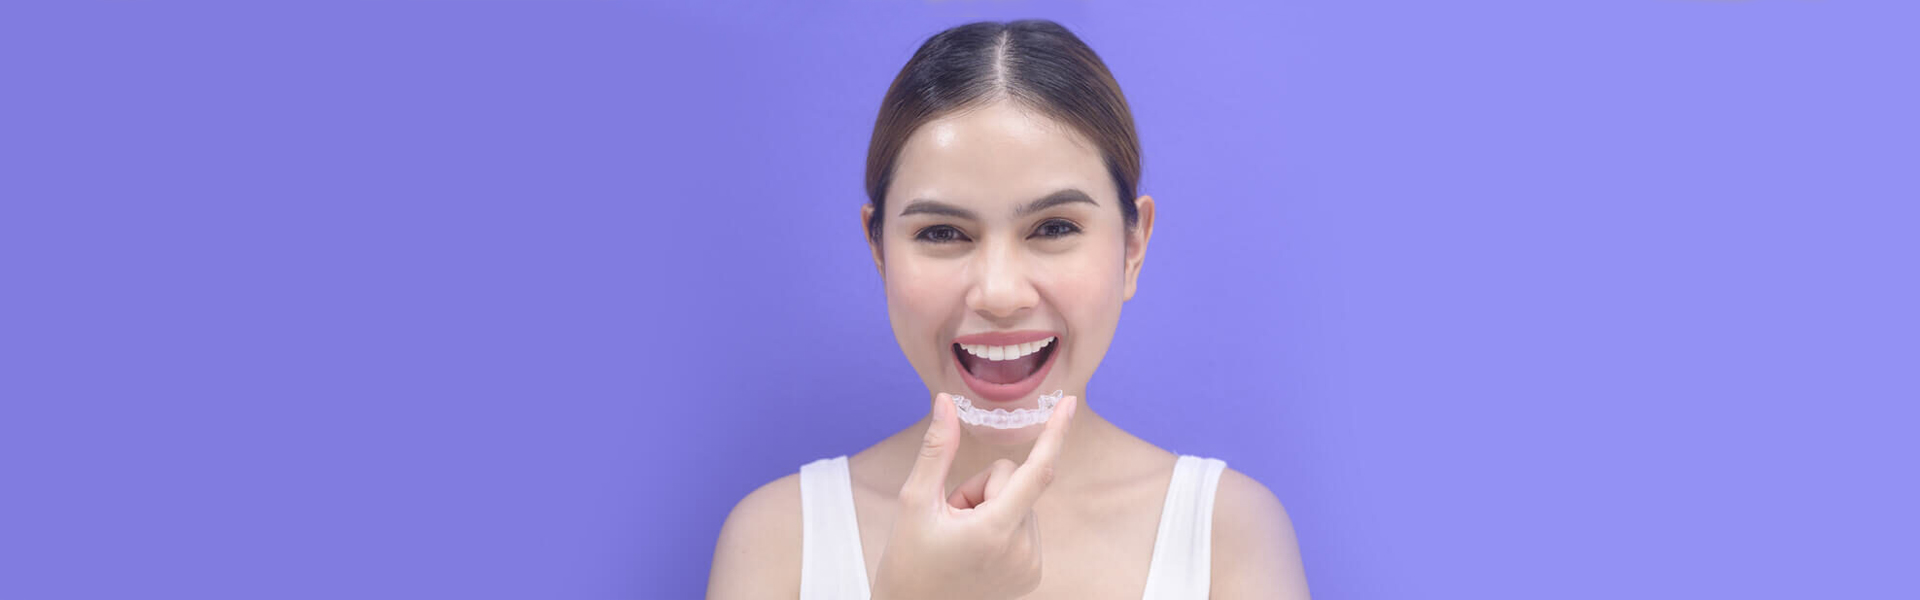 What Are the Pros and Cons of Invisalign?